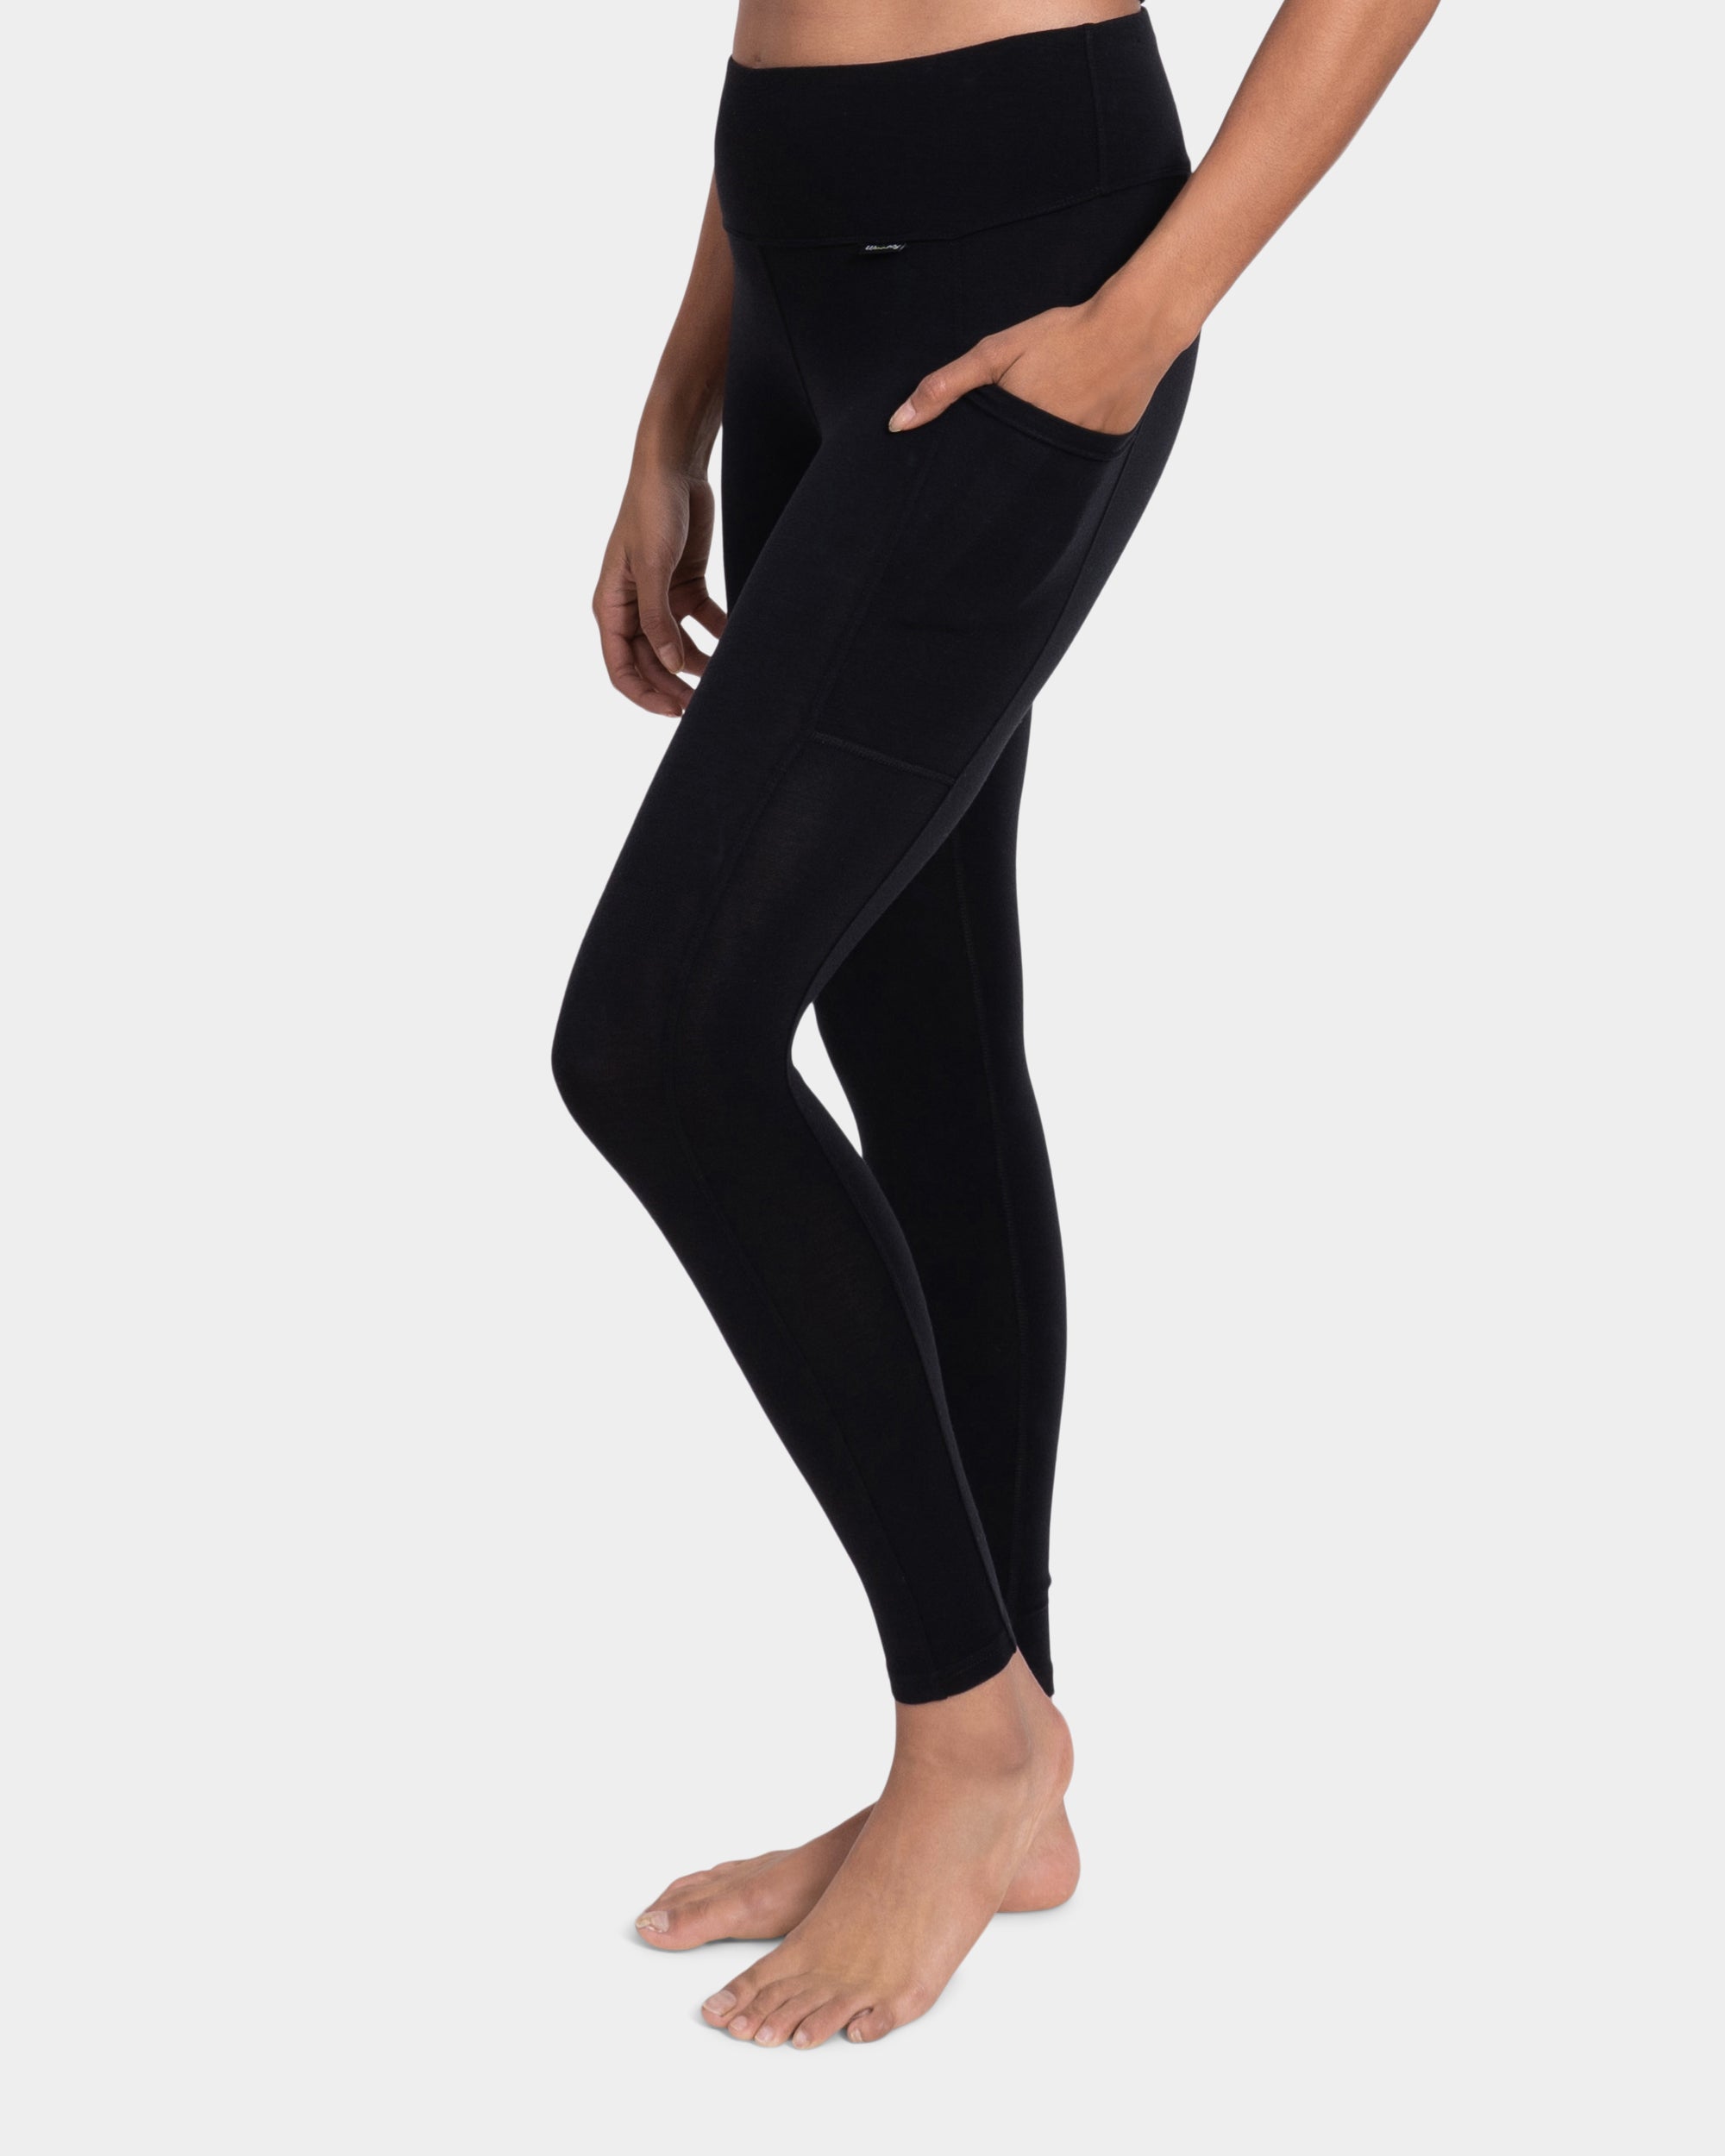  32 Degrees Women's High Waist Yoga Pants with Pockets